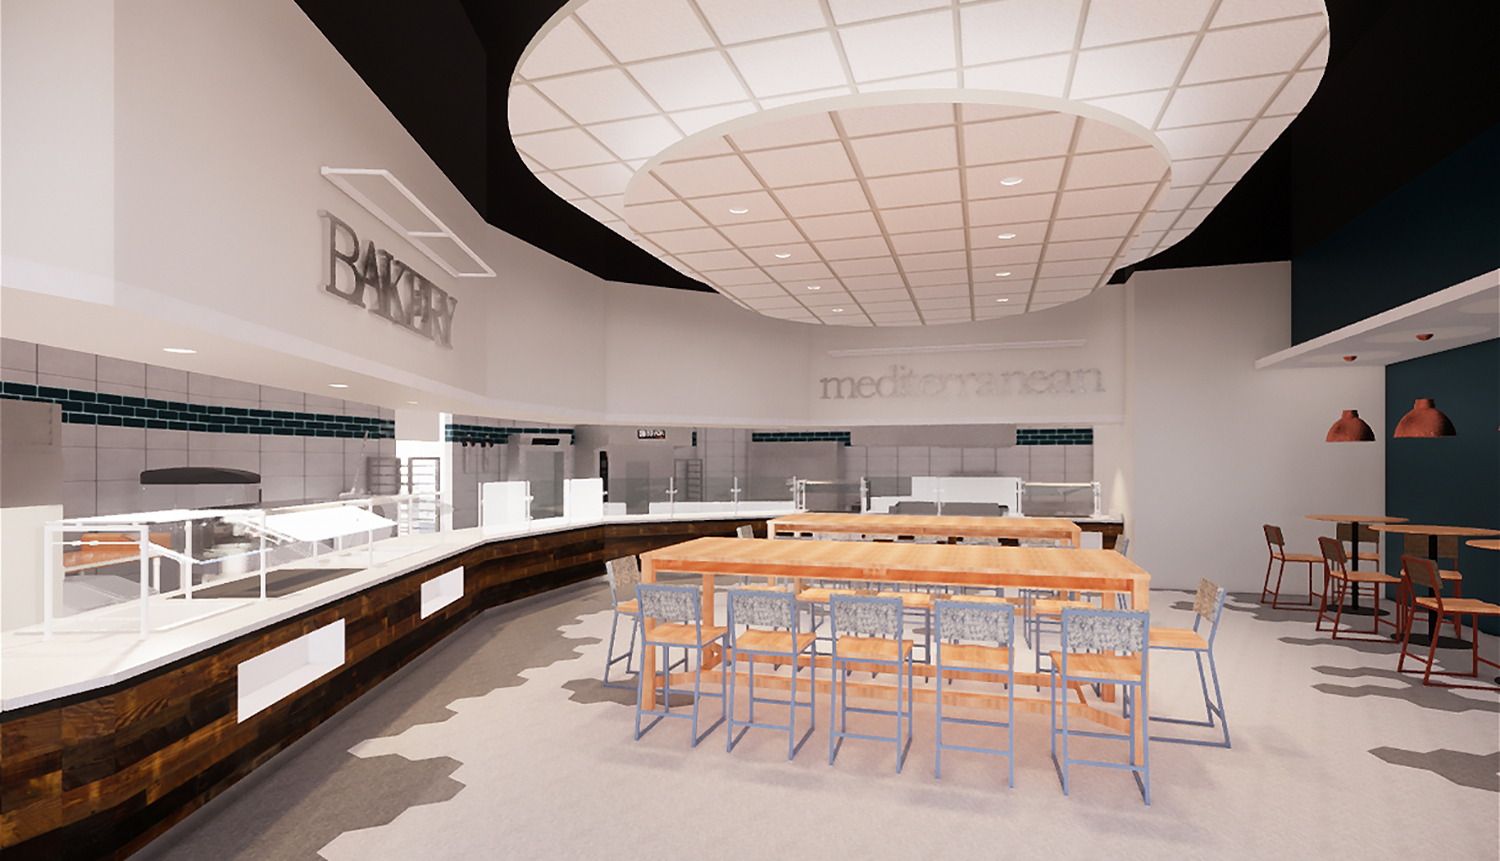 Village View Dining Facility Renovations